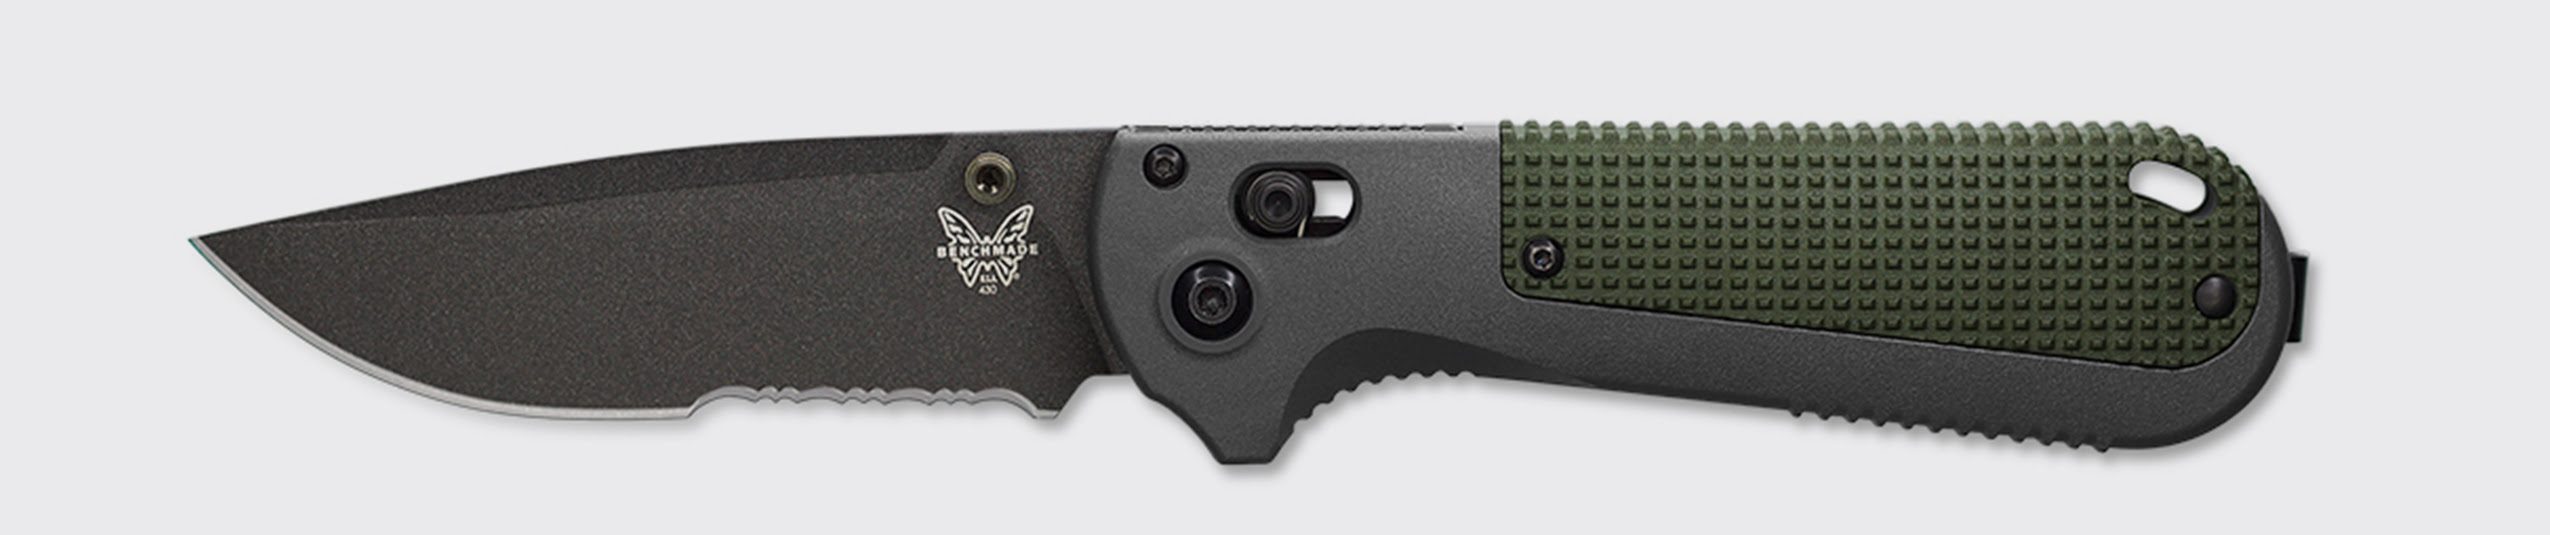 Benchmade Releases Its New 430BK and 430SBK Redoubt EDC Folders